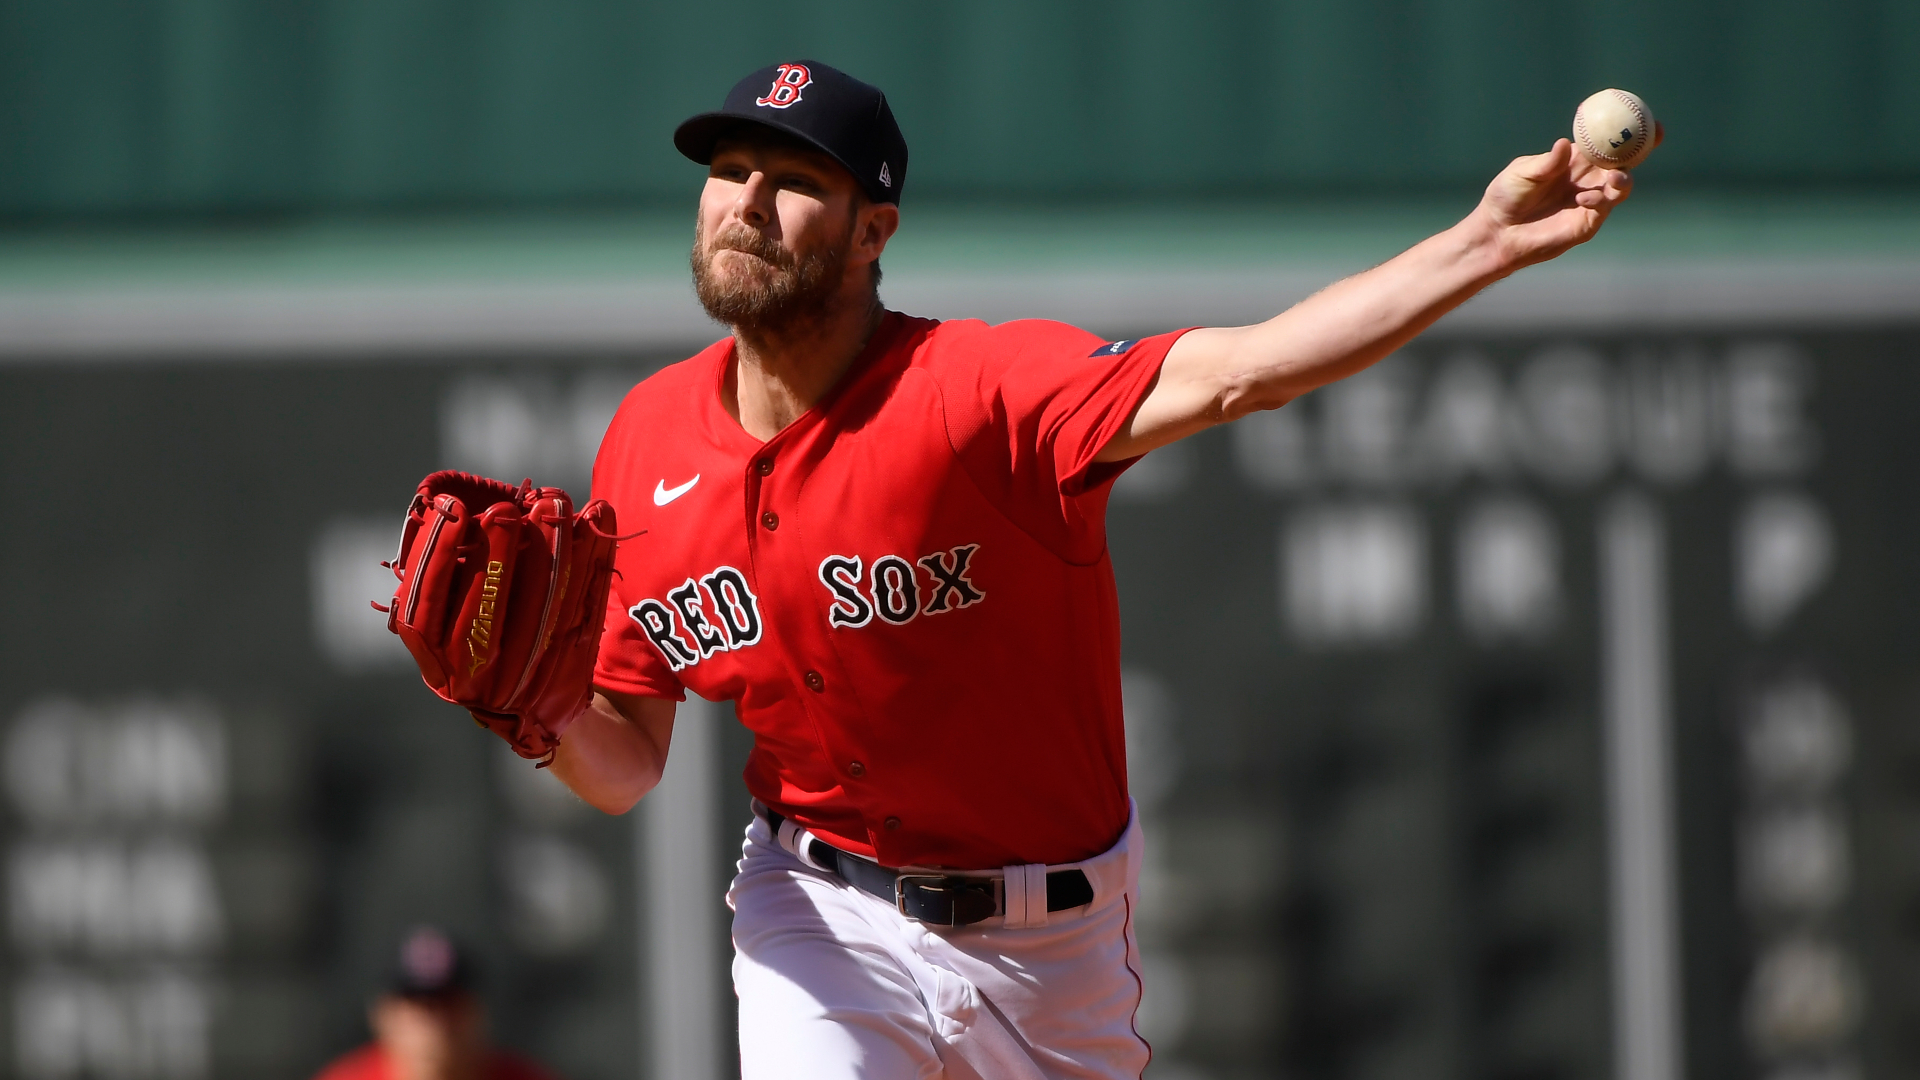 Red Sox's Chris Sale Takes 'Calm' Approach To Superb Outing